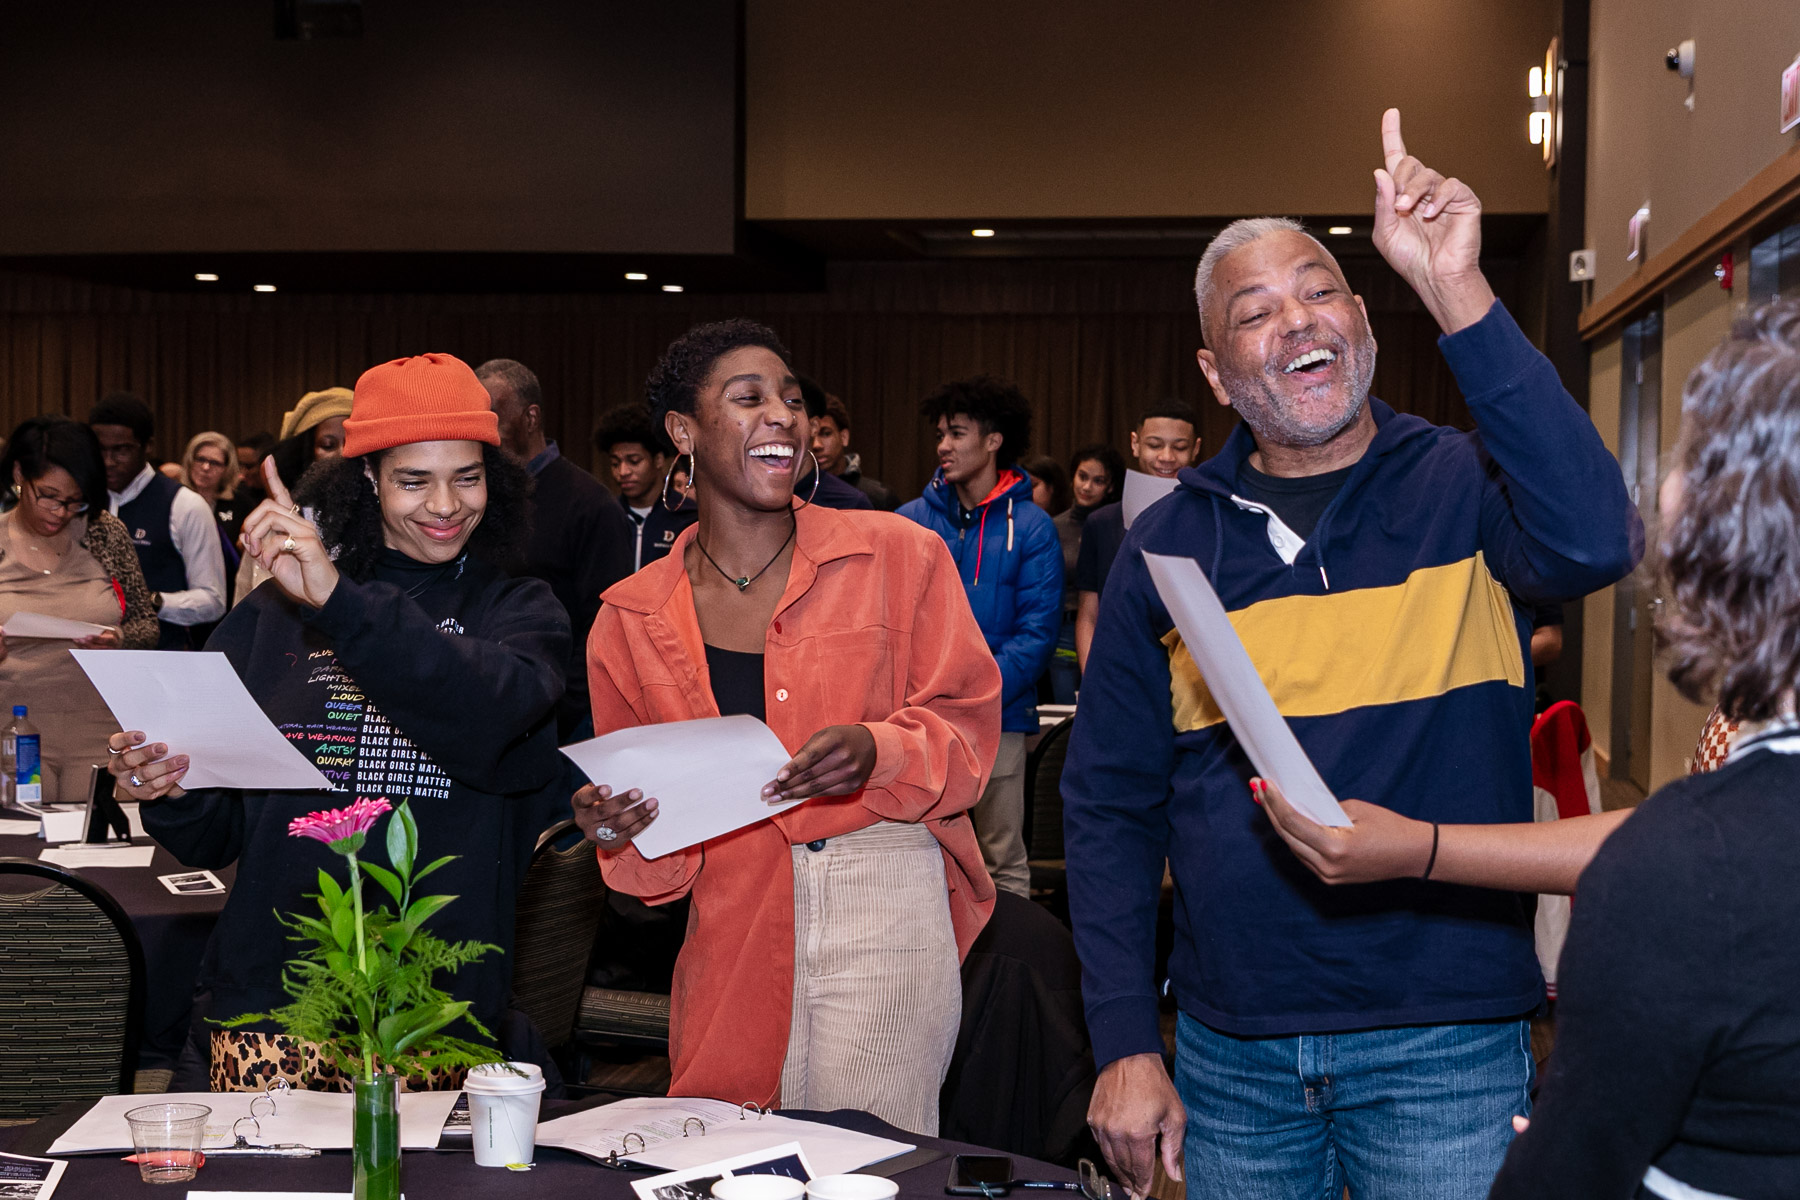 Guests join in singing, "Lift Ev’ry Voice and Sing." (DePaul University/Randall Spriggs)